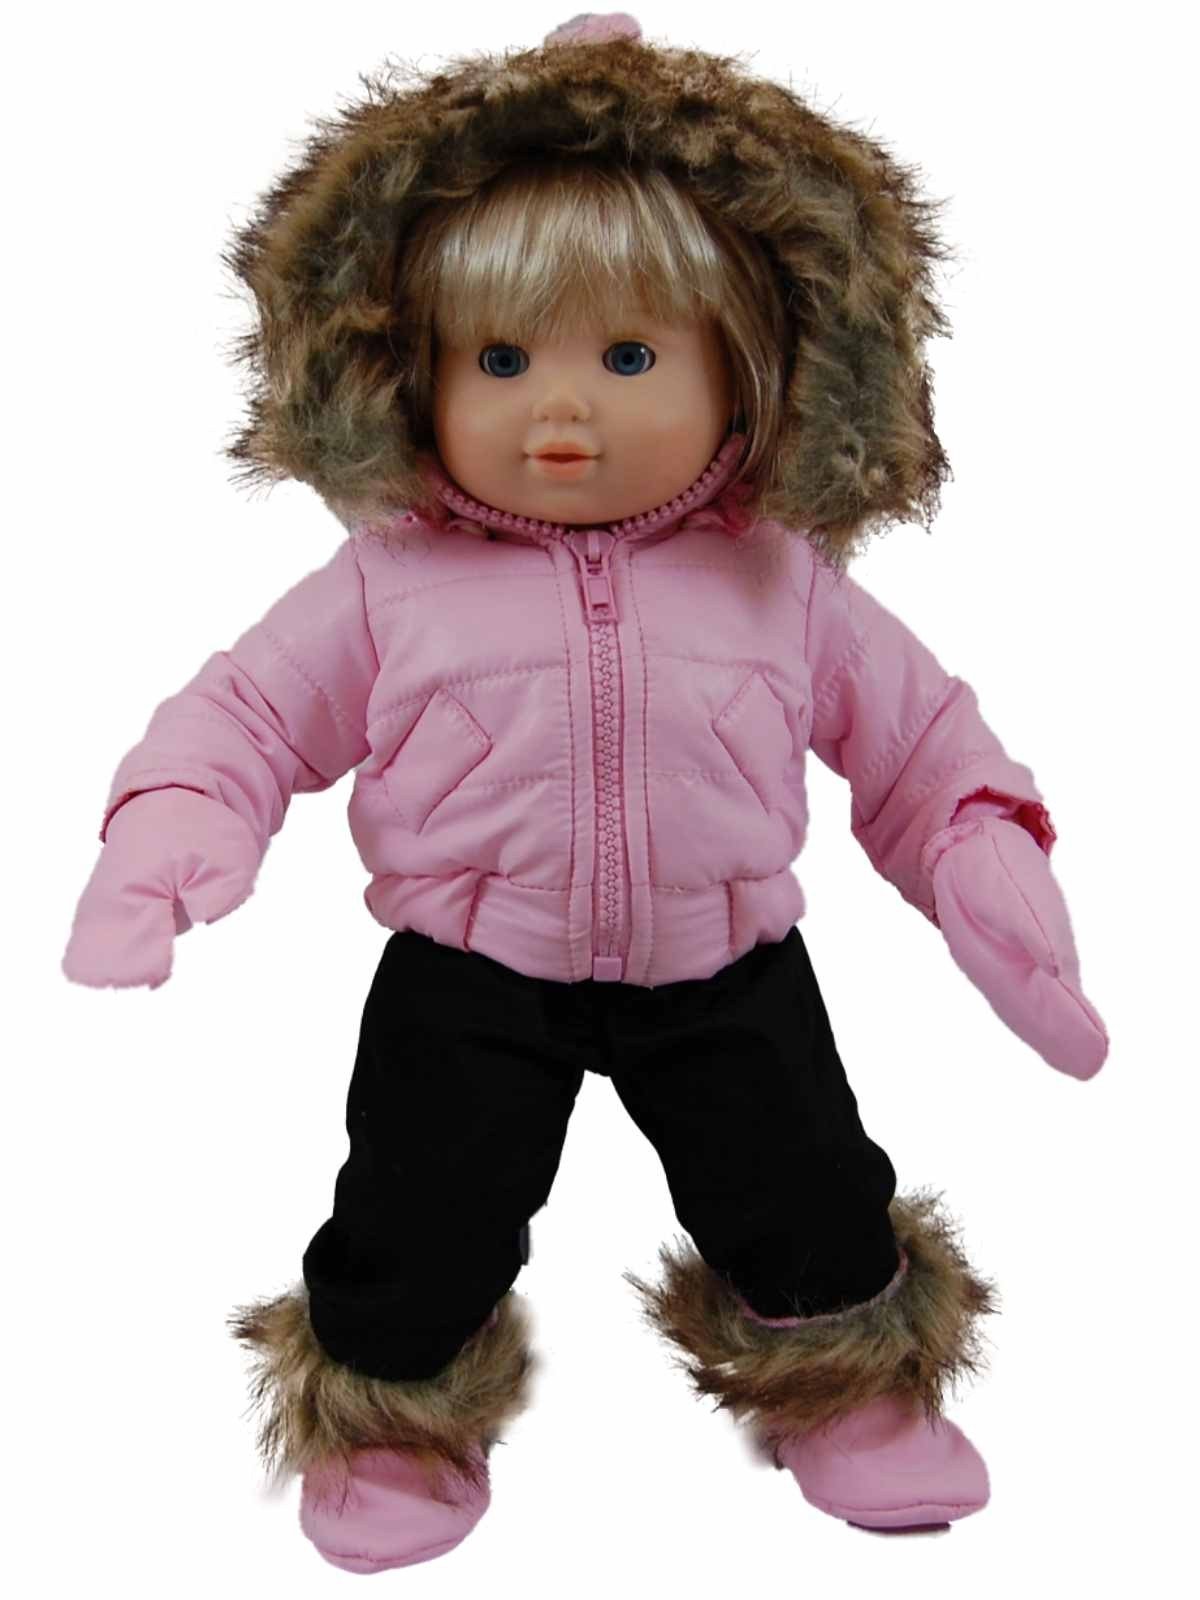 American Girl Discontinues Its Only Asian-American Doll ...